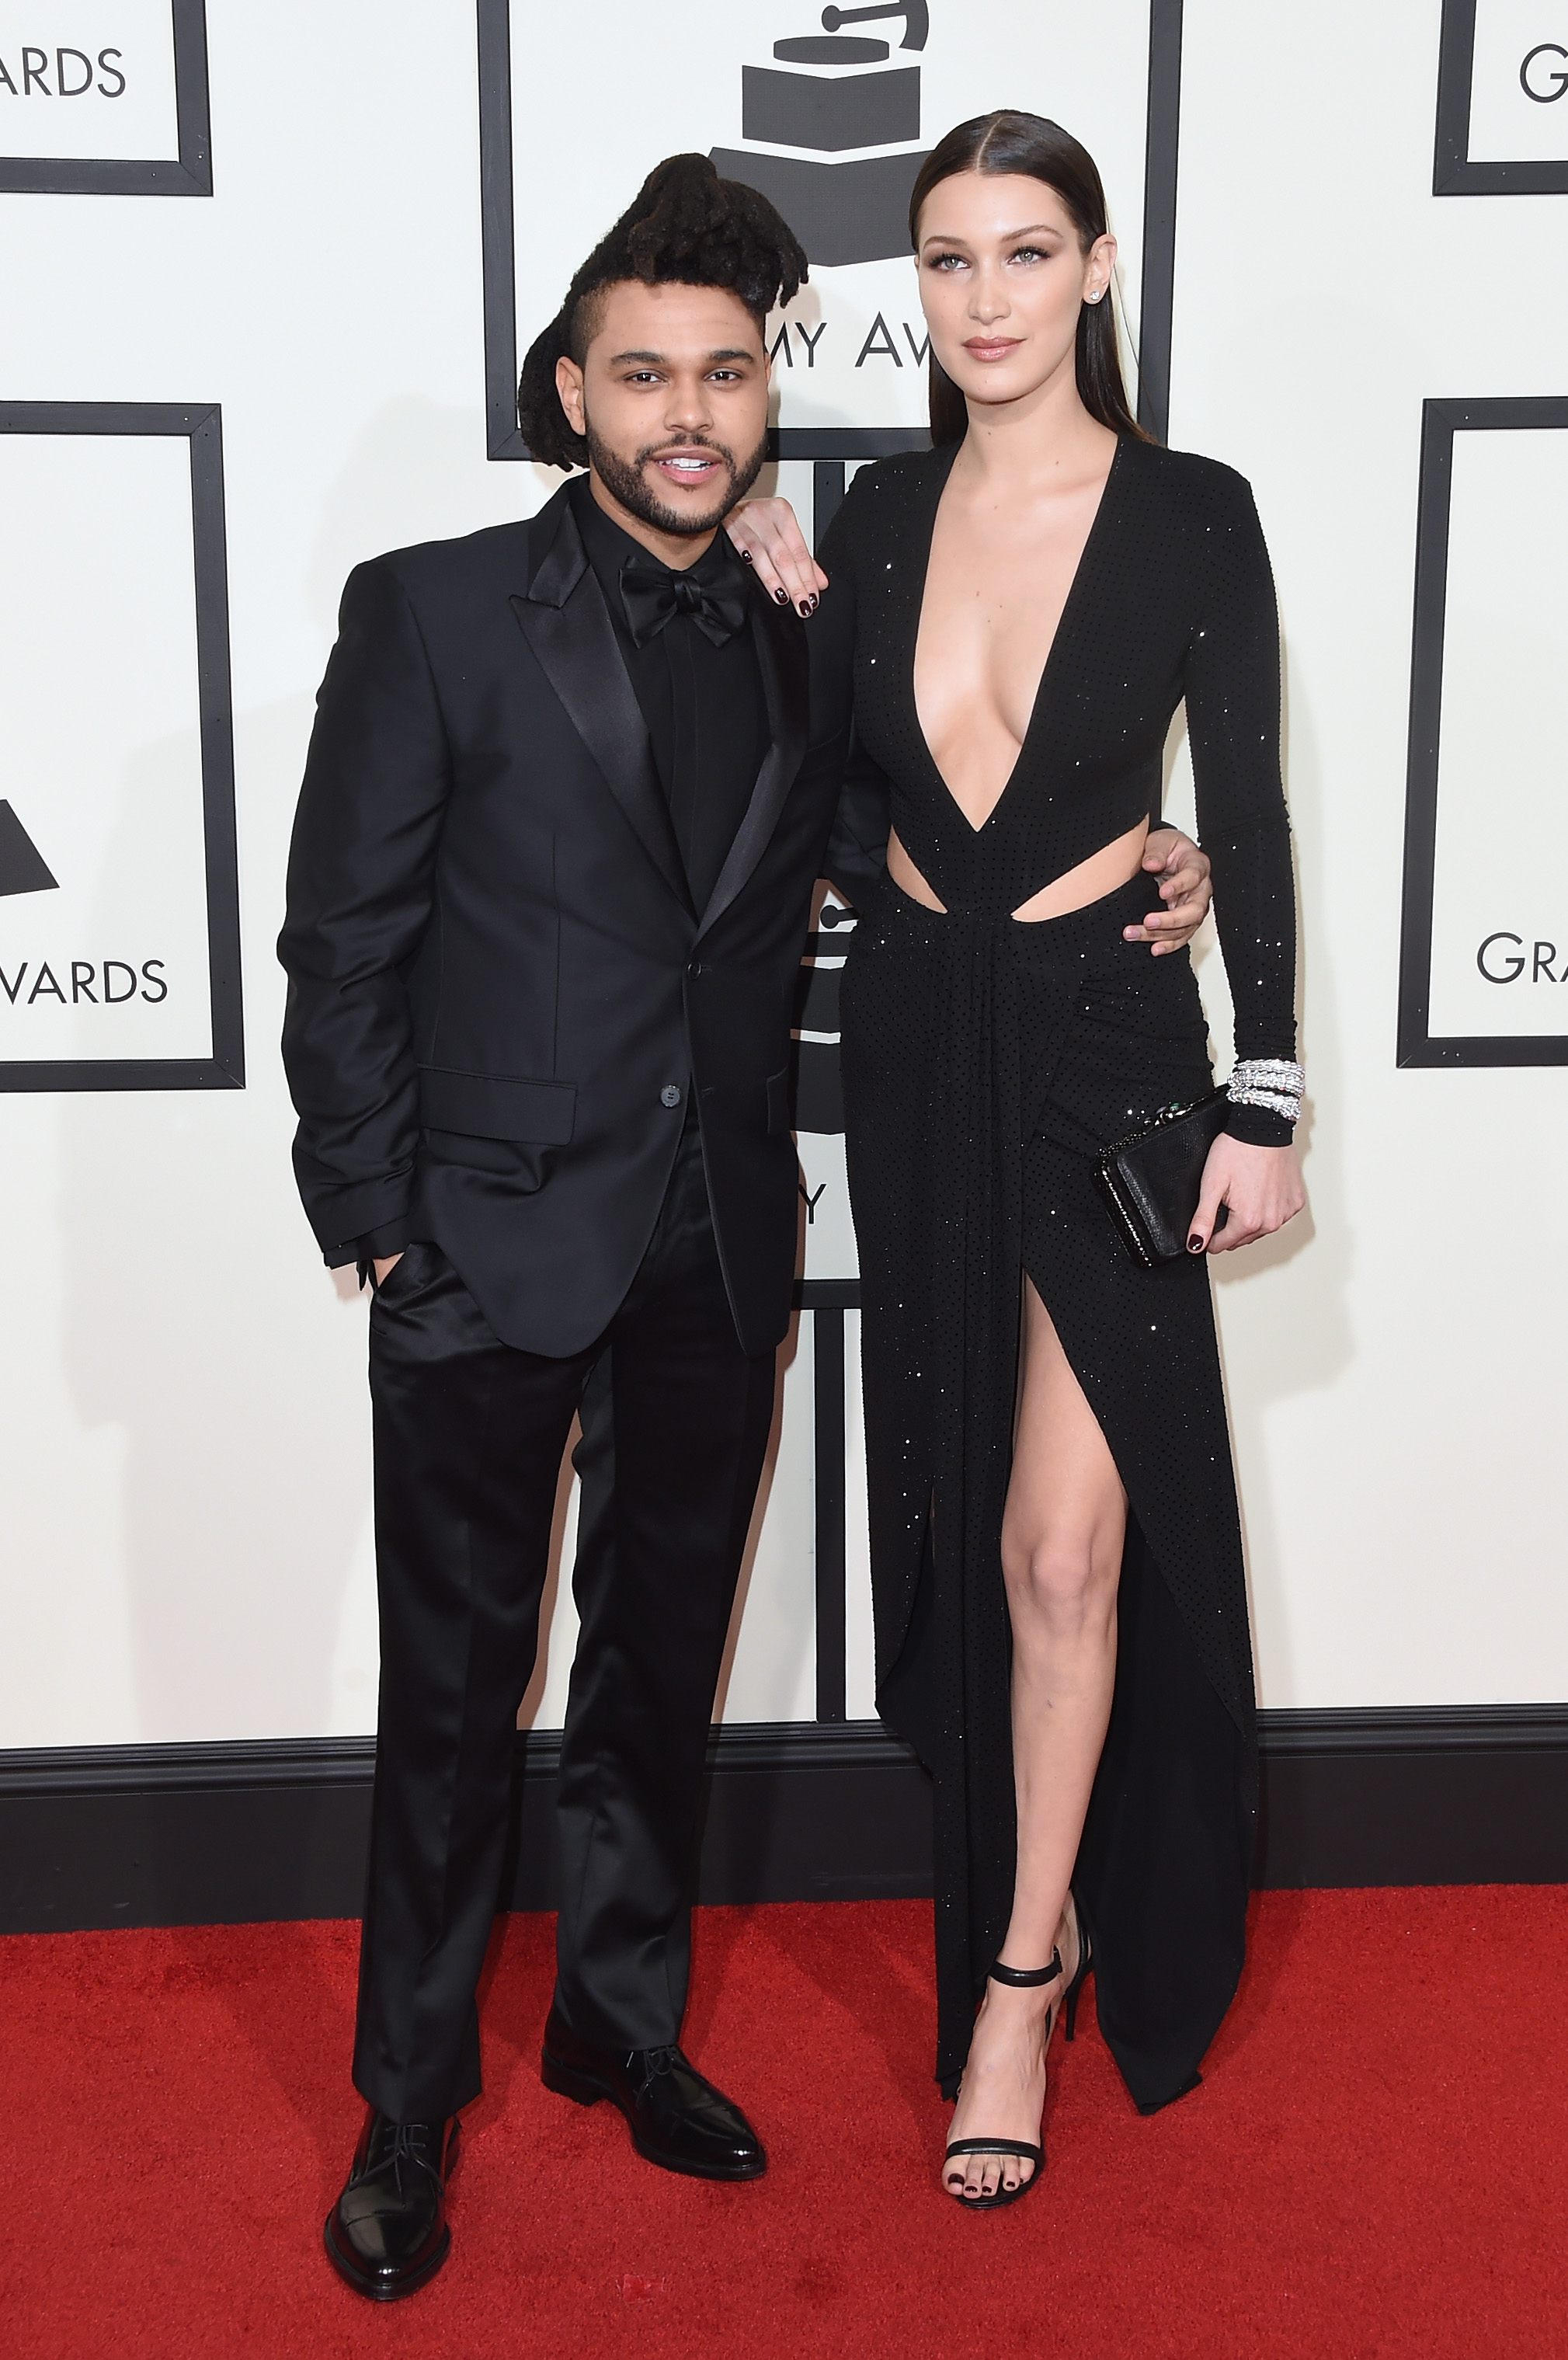 The Weeknd, left, and Bella Hadid, right, attend the 58th GRAMMY Awards at Staples Center on Feb. 15, 2016 in Los Angeles.